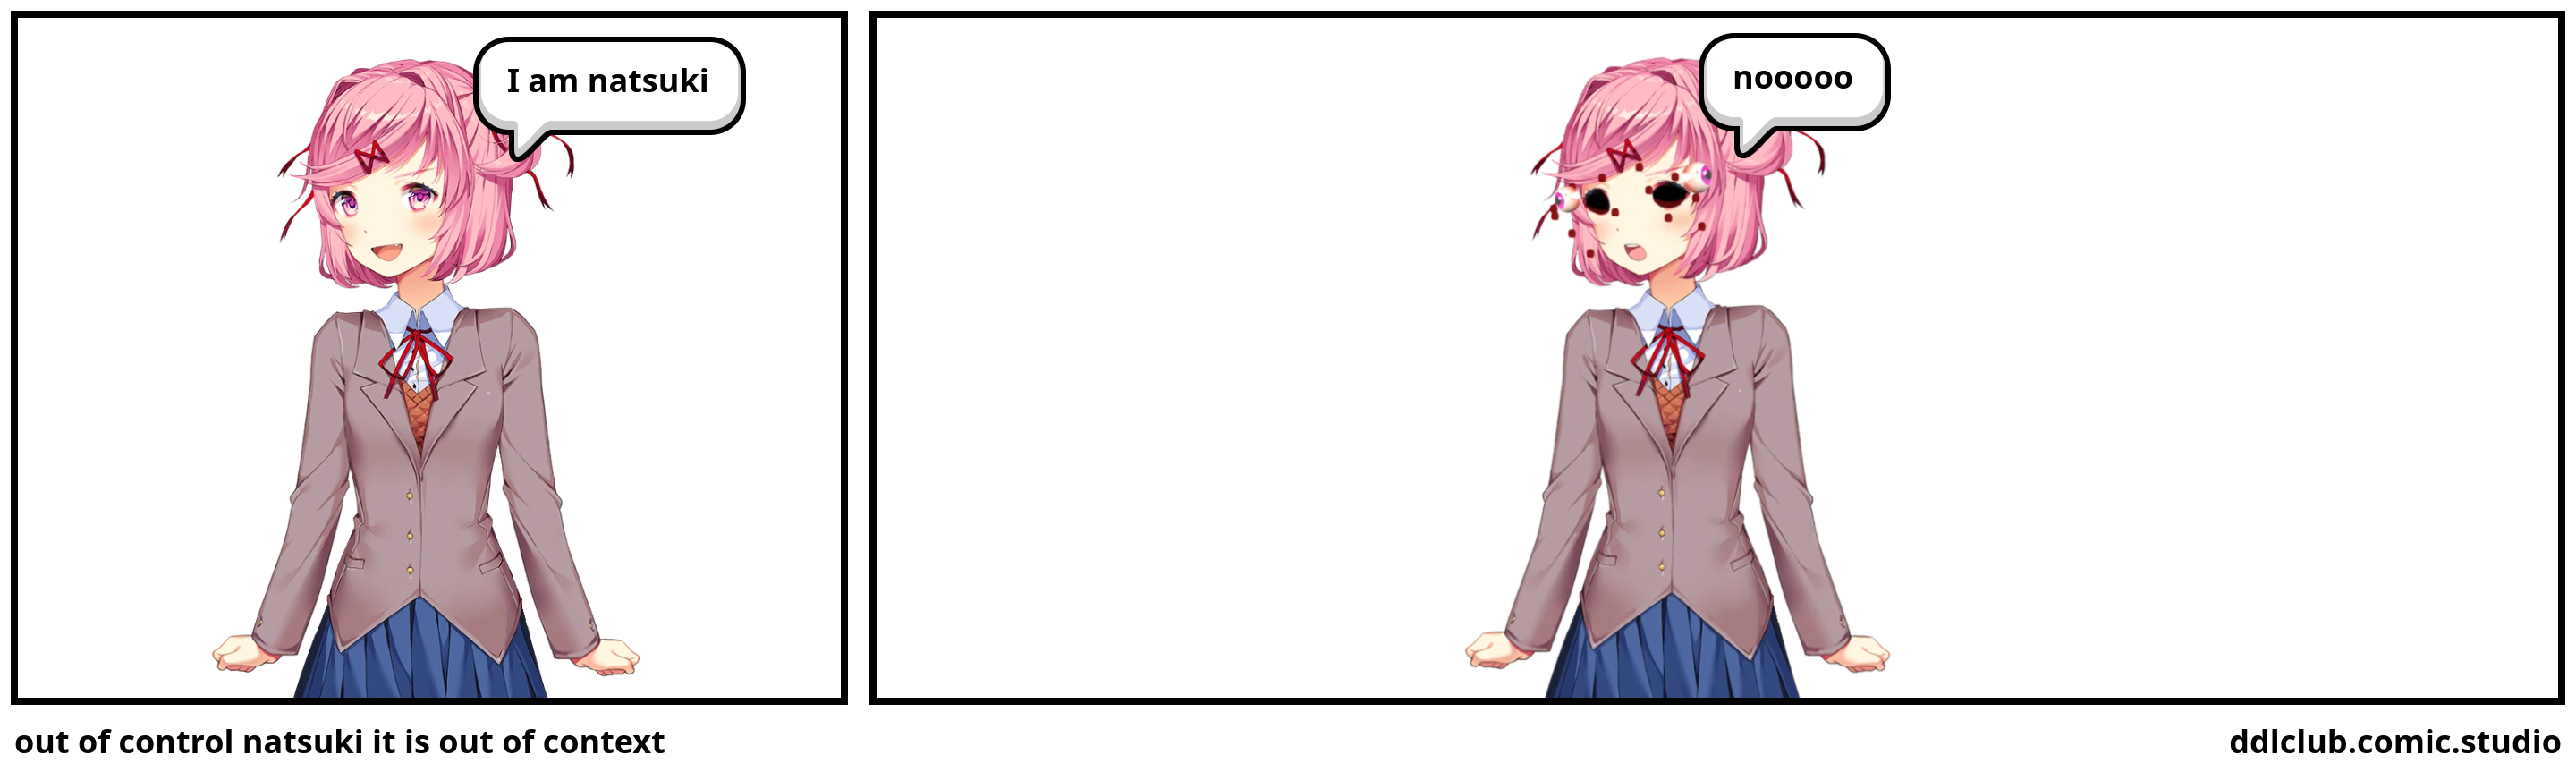 out of control natsuki it is out of context